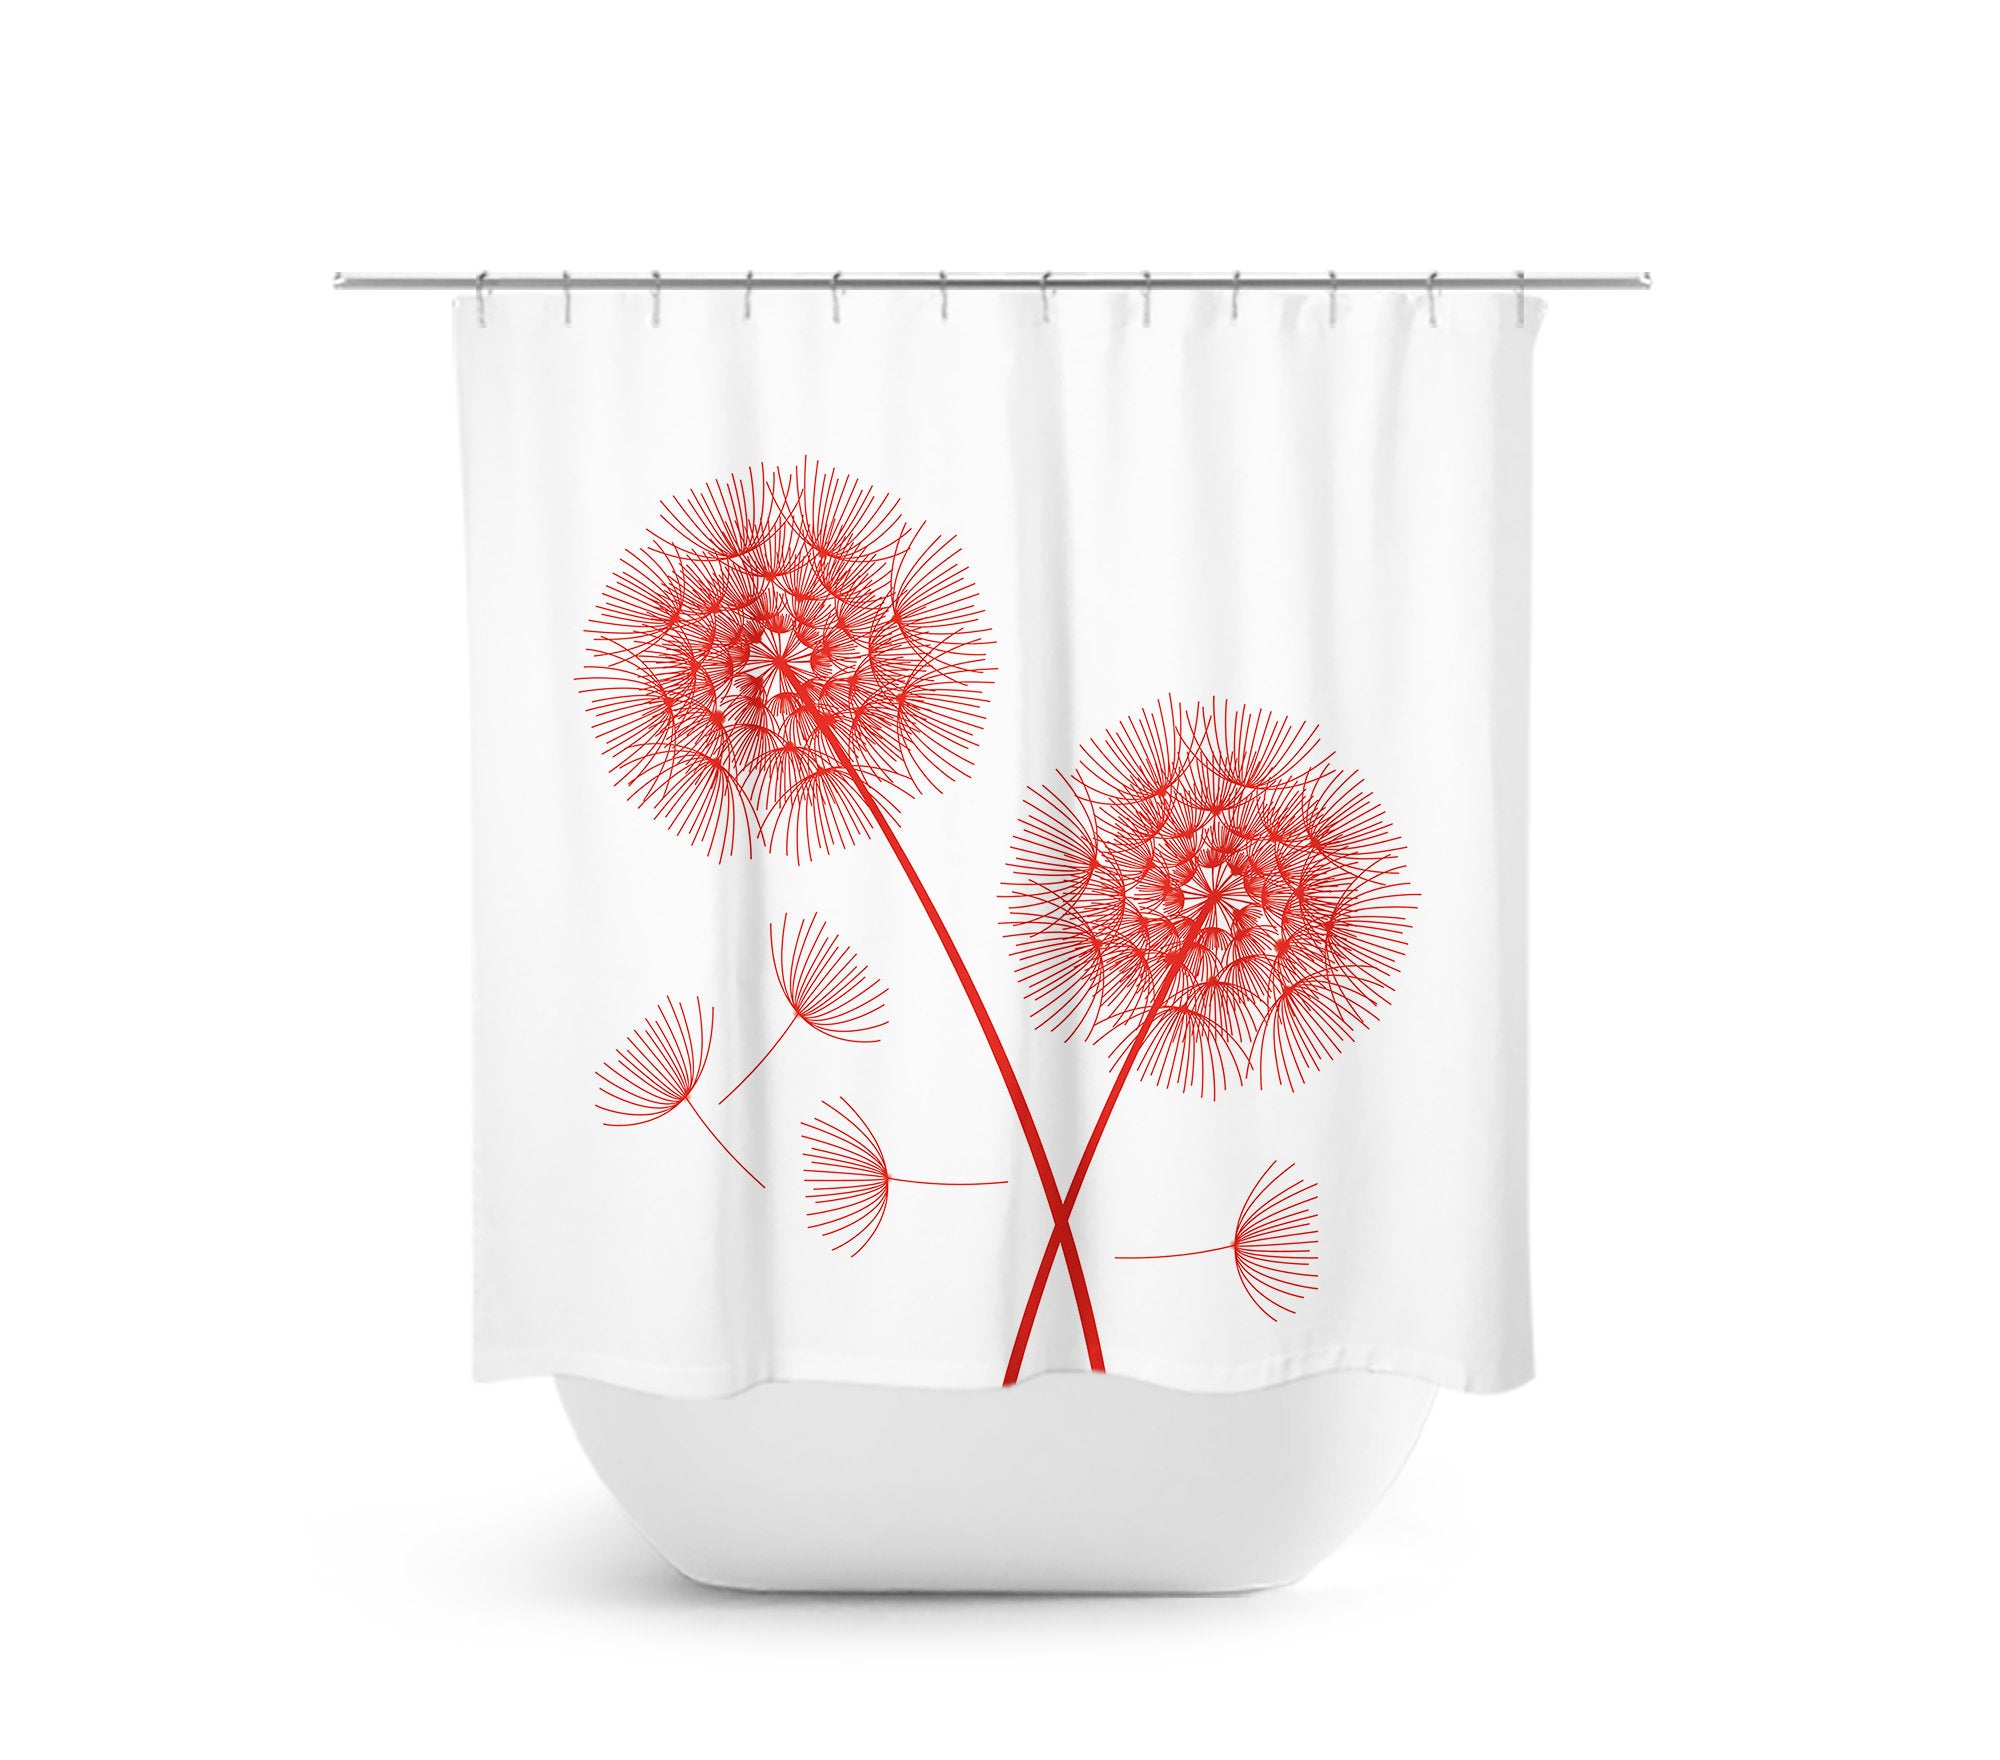 Classic White & Red Dandelion Fabric Shower Curtain - SHOWER55